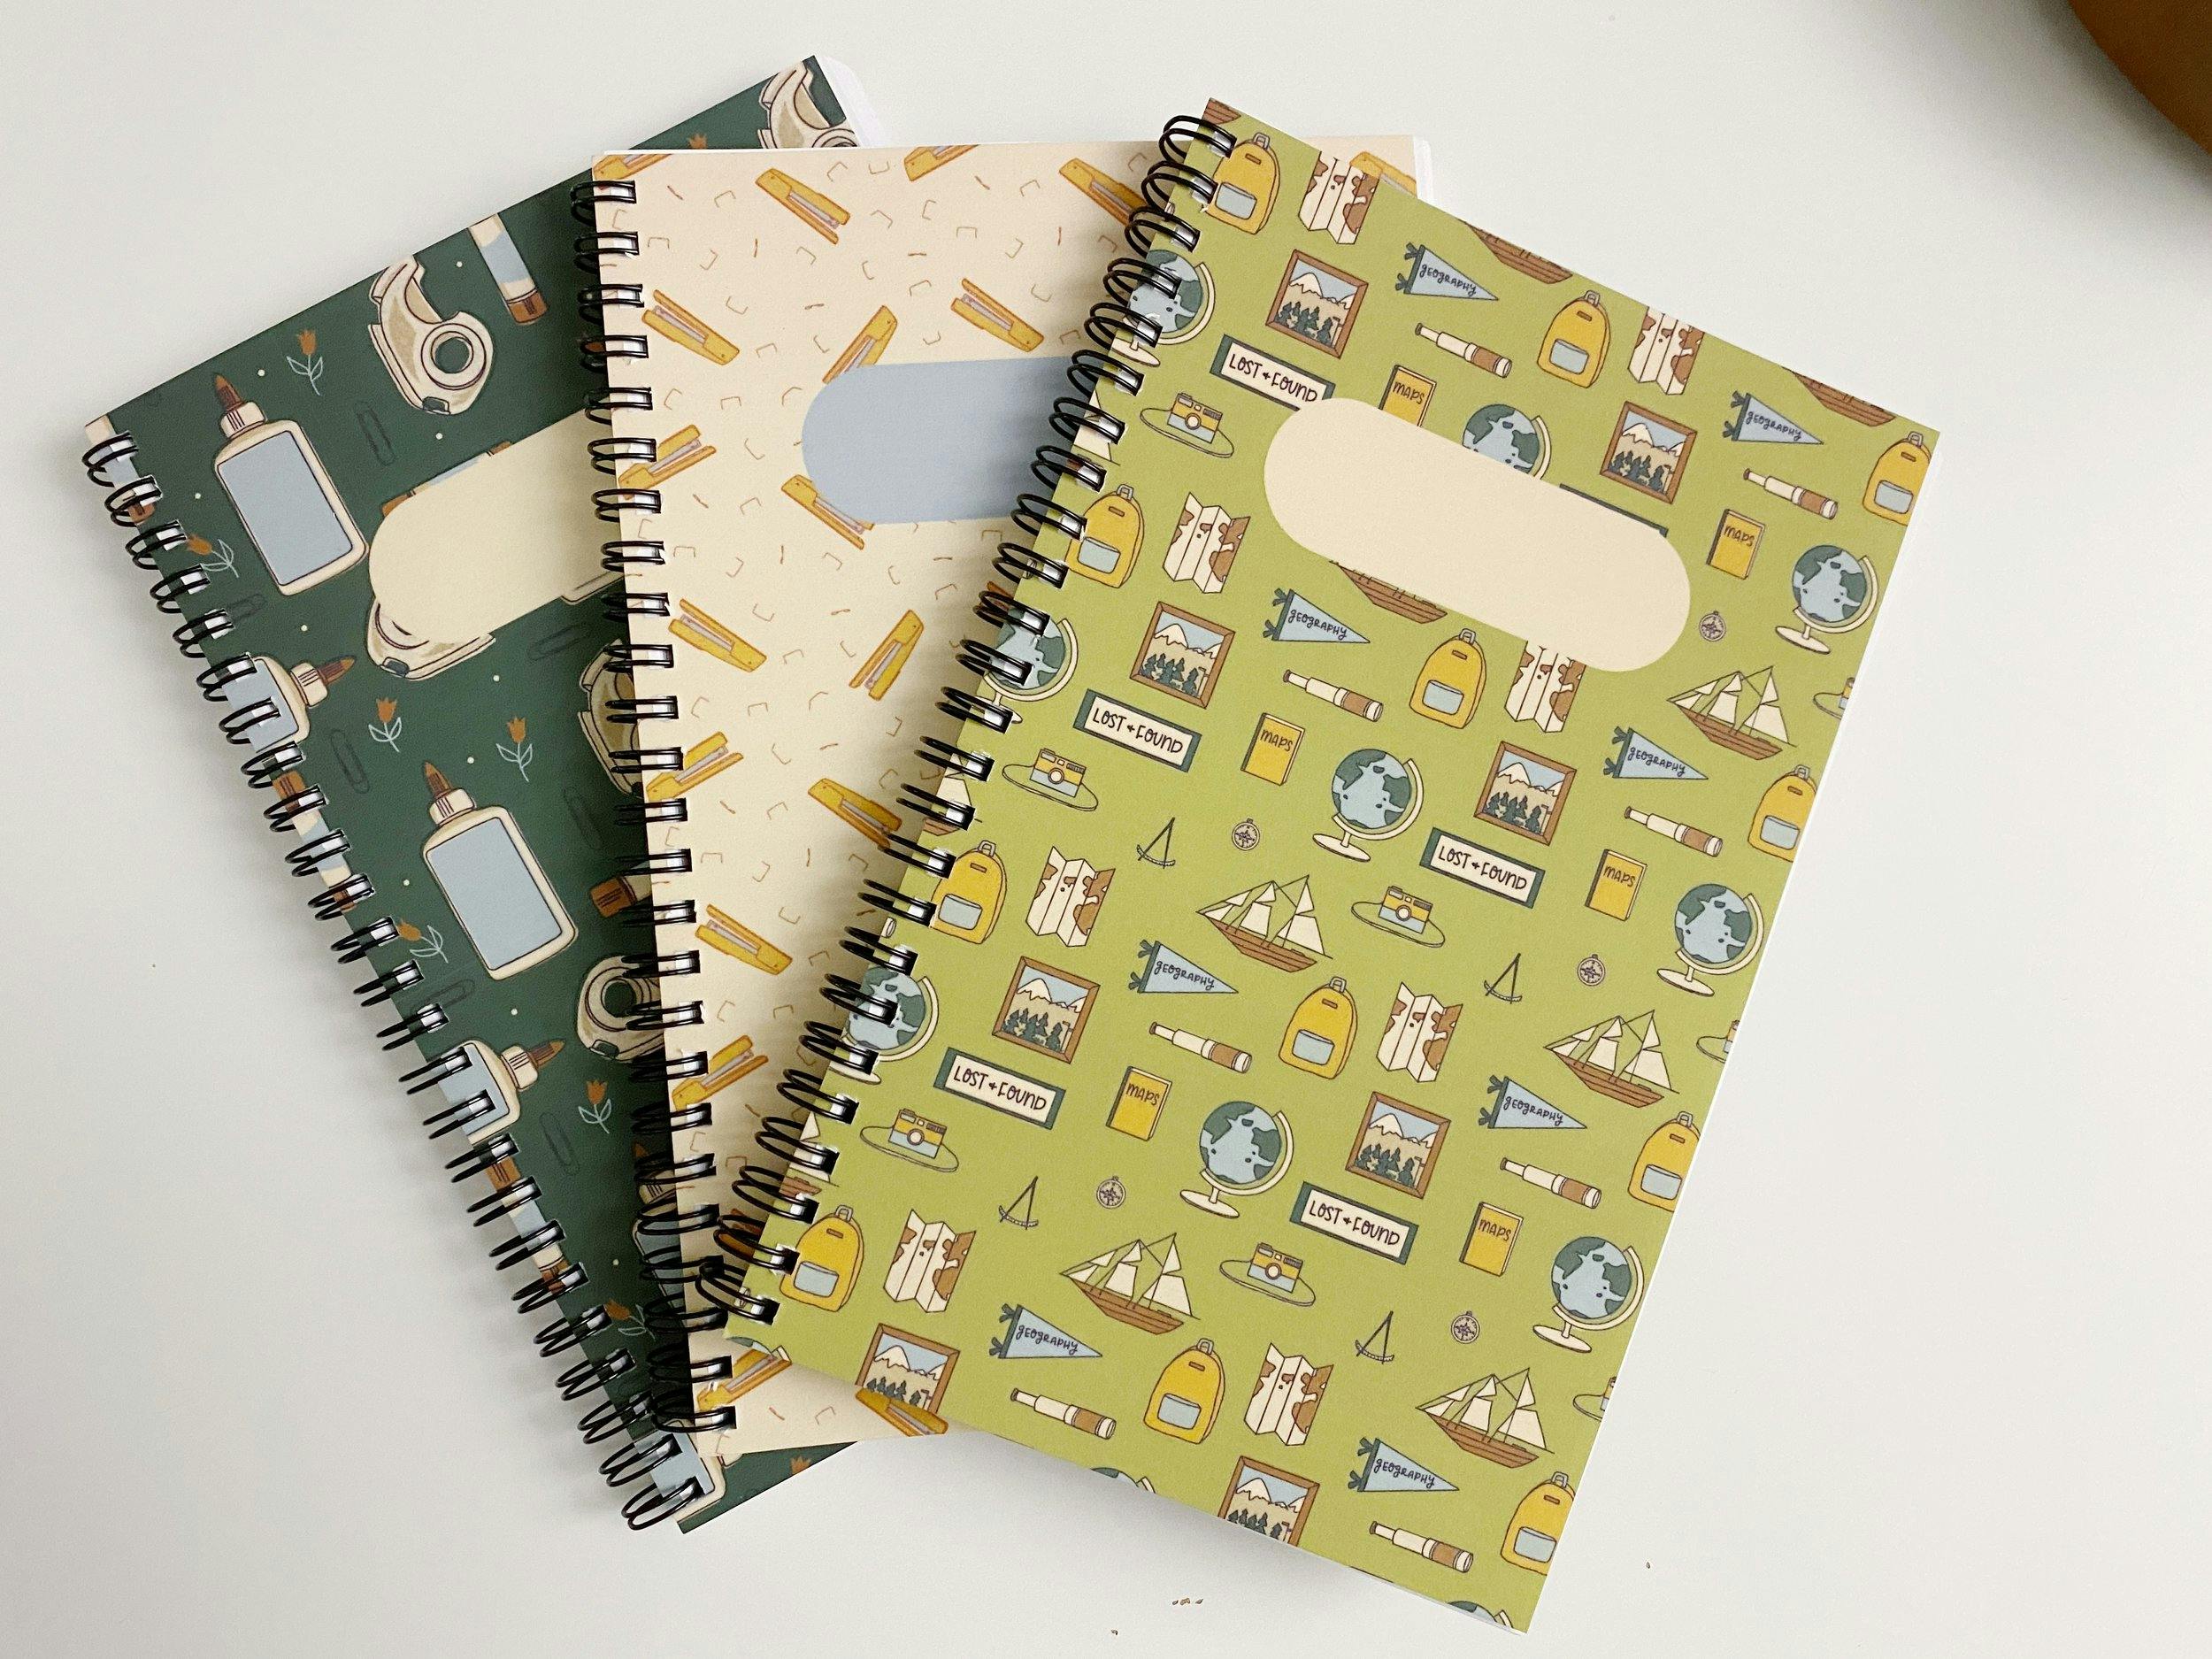 Patterns applied to notebook covers